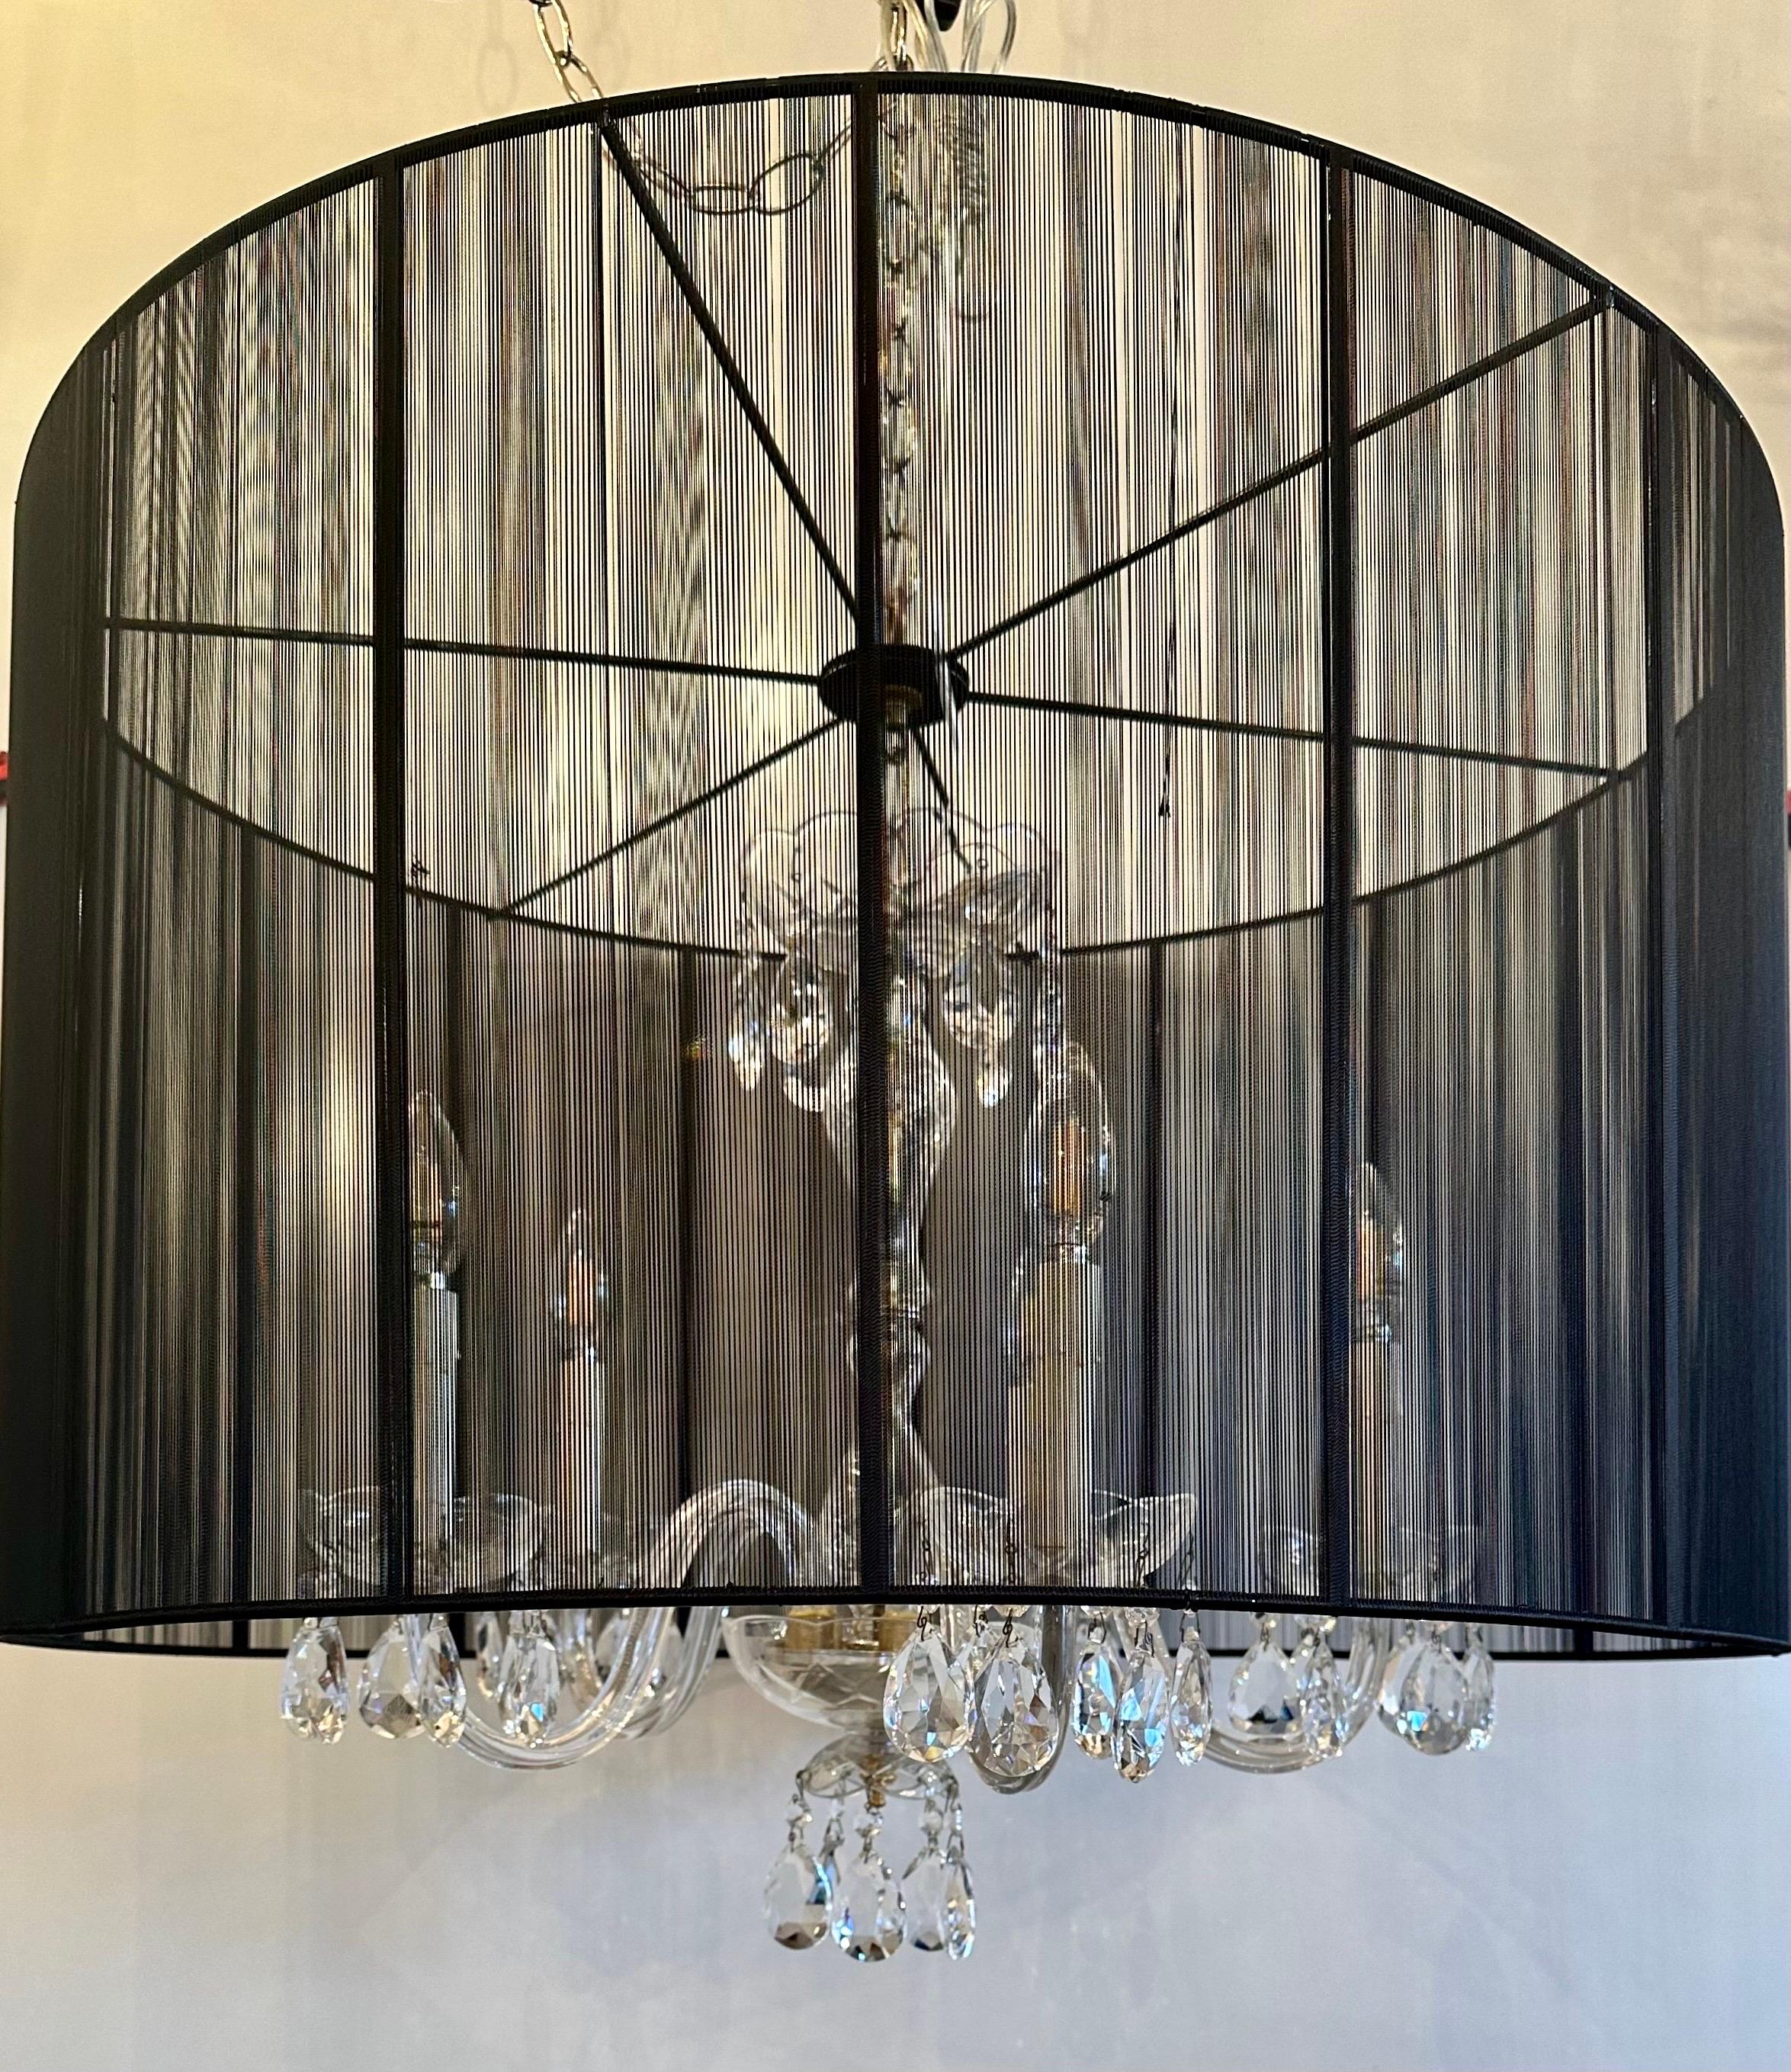 Adding this black modern silk shade to this antique crystal chandelier brings it to life in a modern way. A little mix of old with the new!